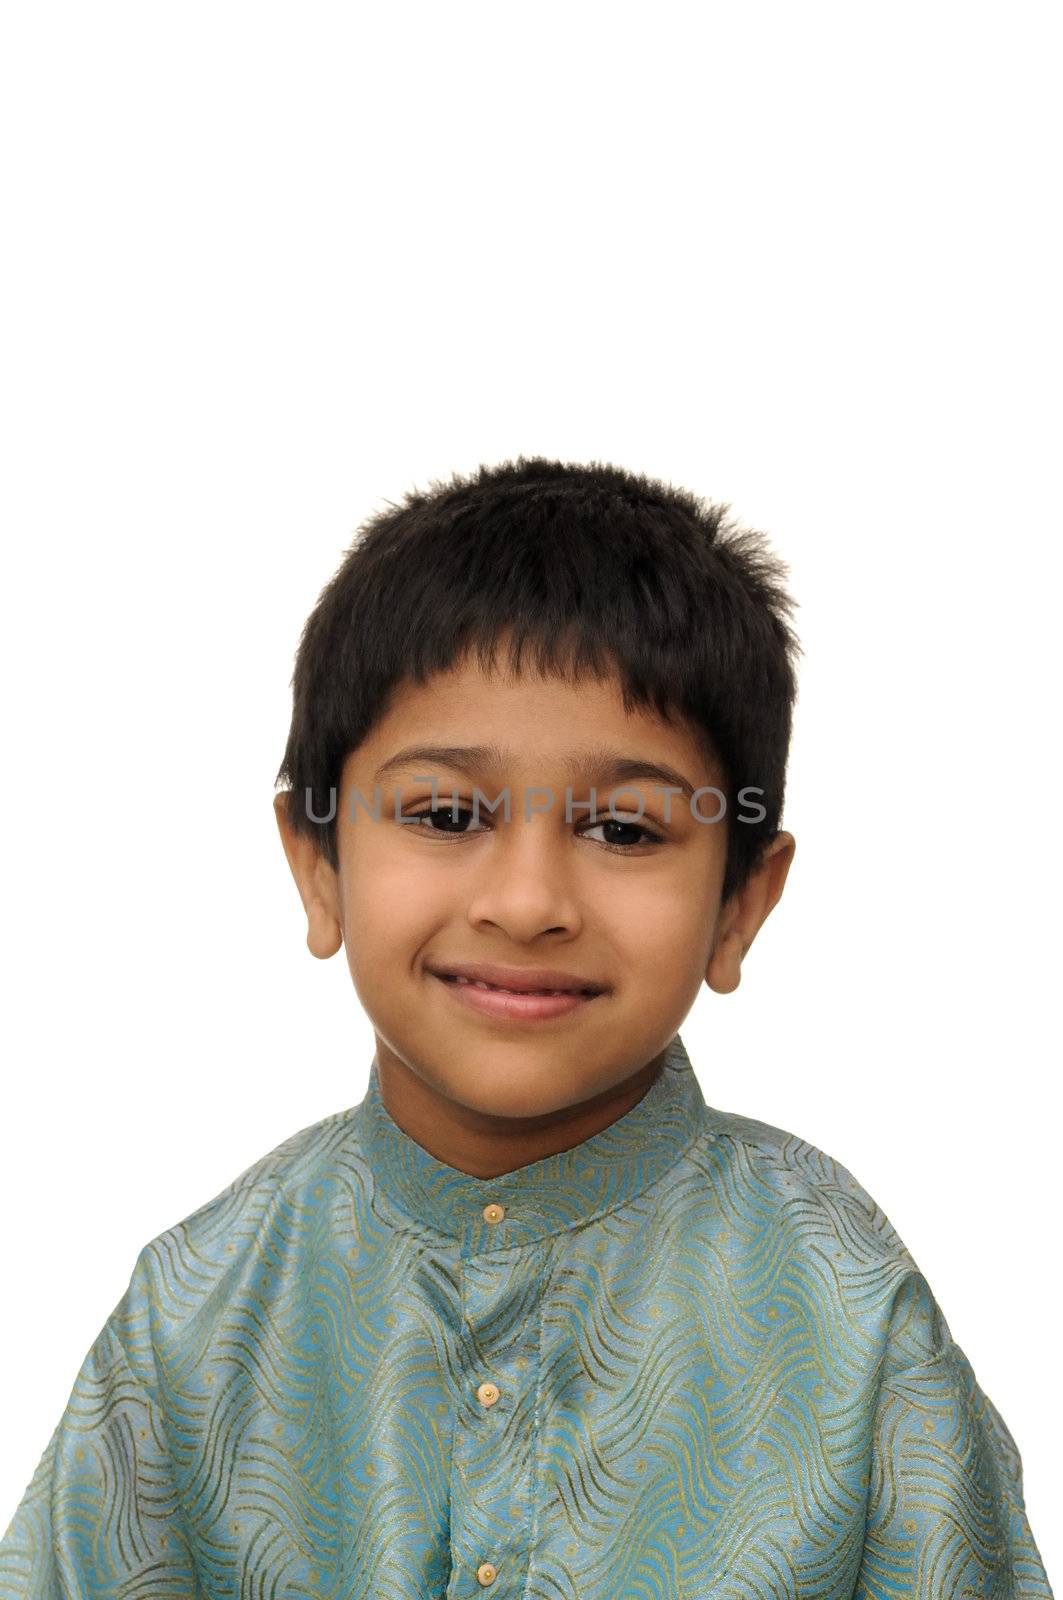 An hanbdsome young Indian child smiling for you
